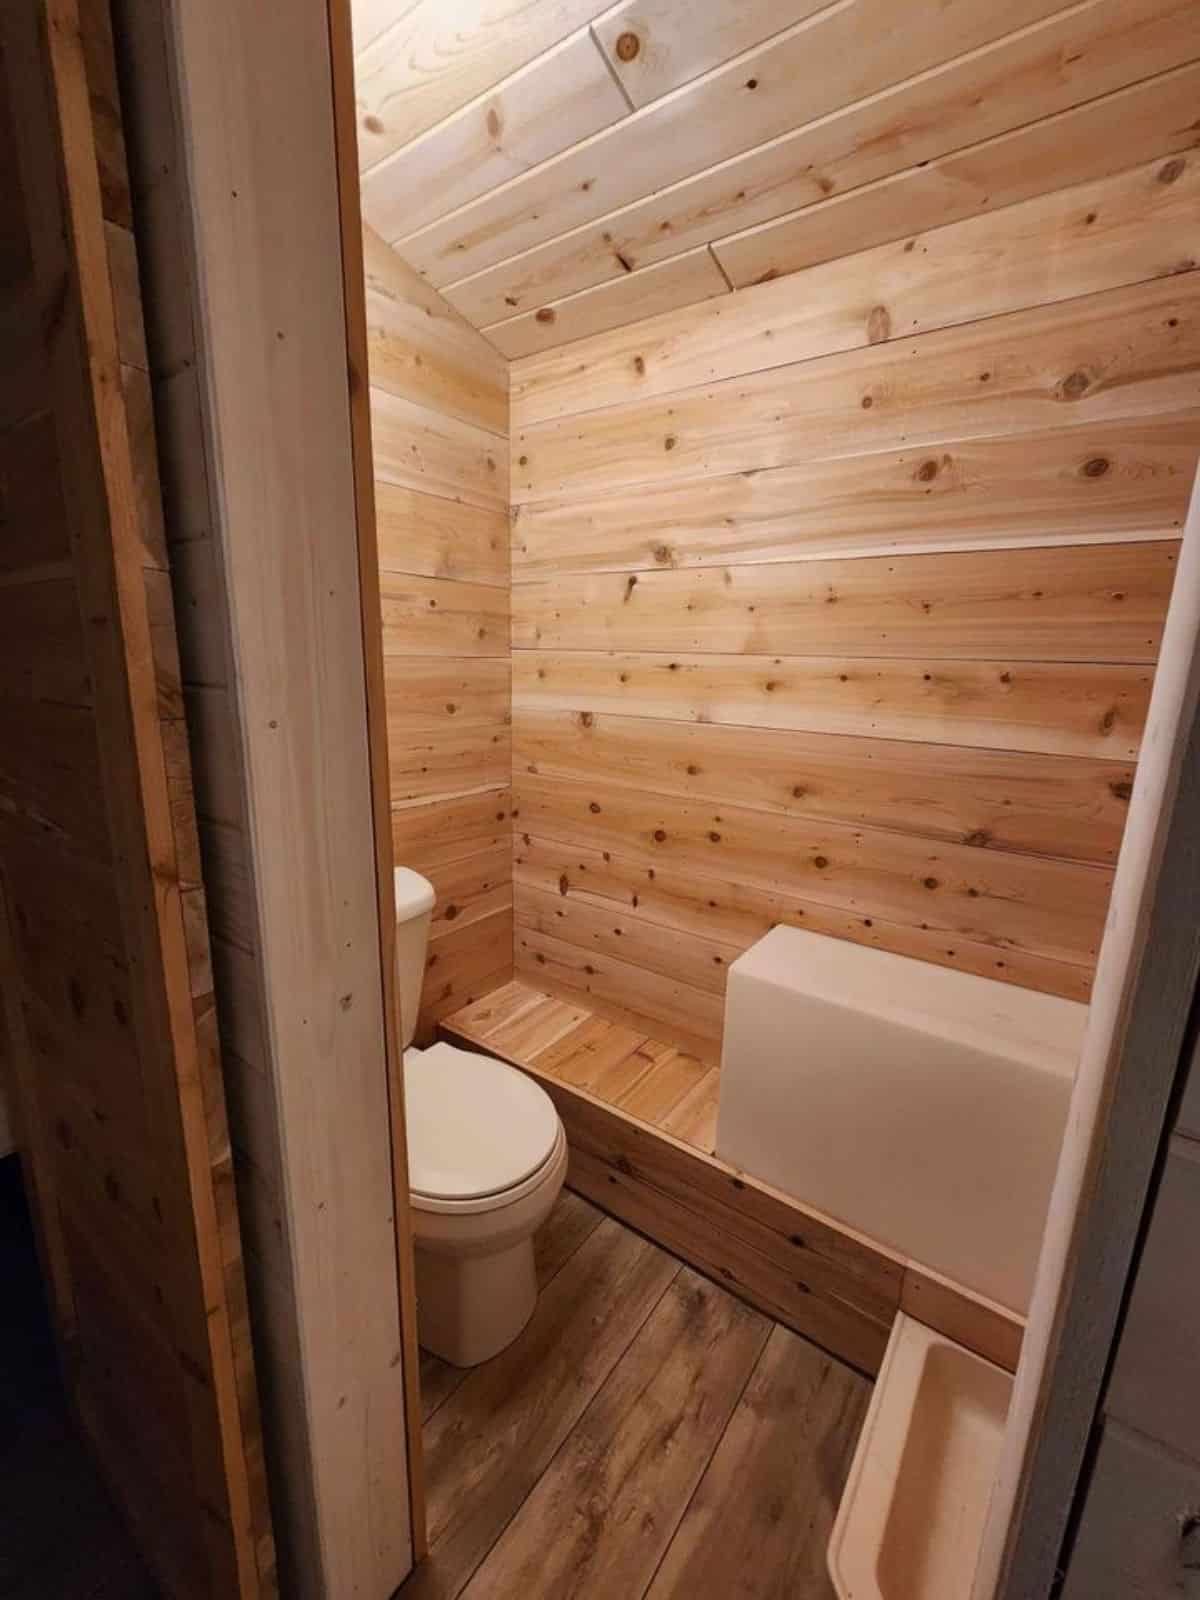 Compact bathroom with all the standard fittings